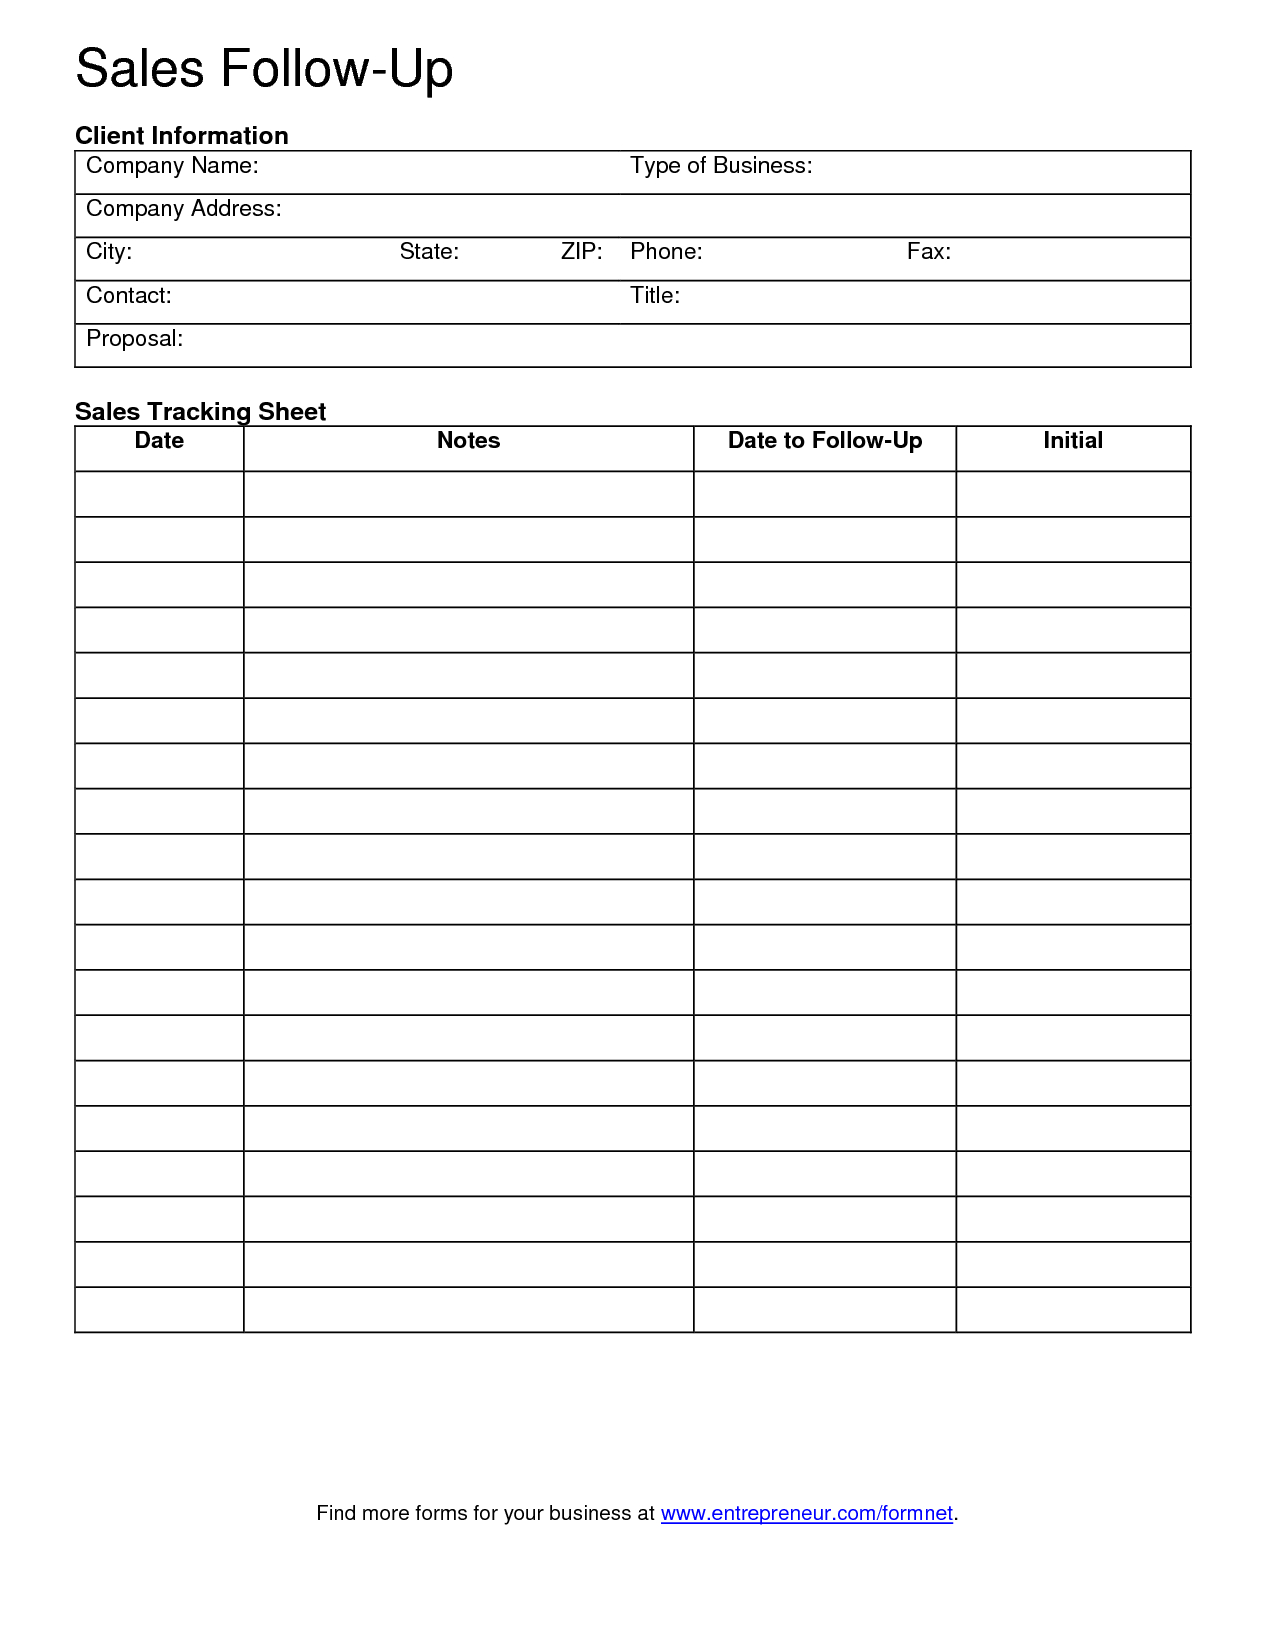 Free Client Contact Sheet | Sales Follow-Up Template | Cars - Free Printable Contact Forms